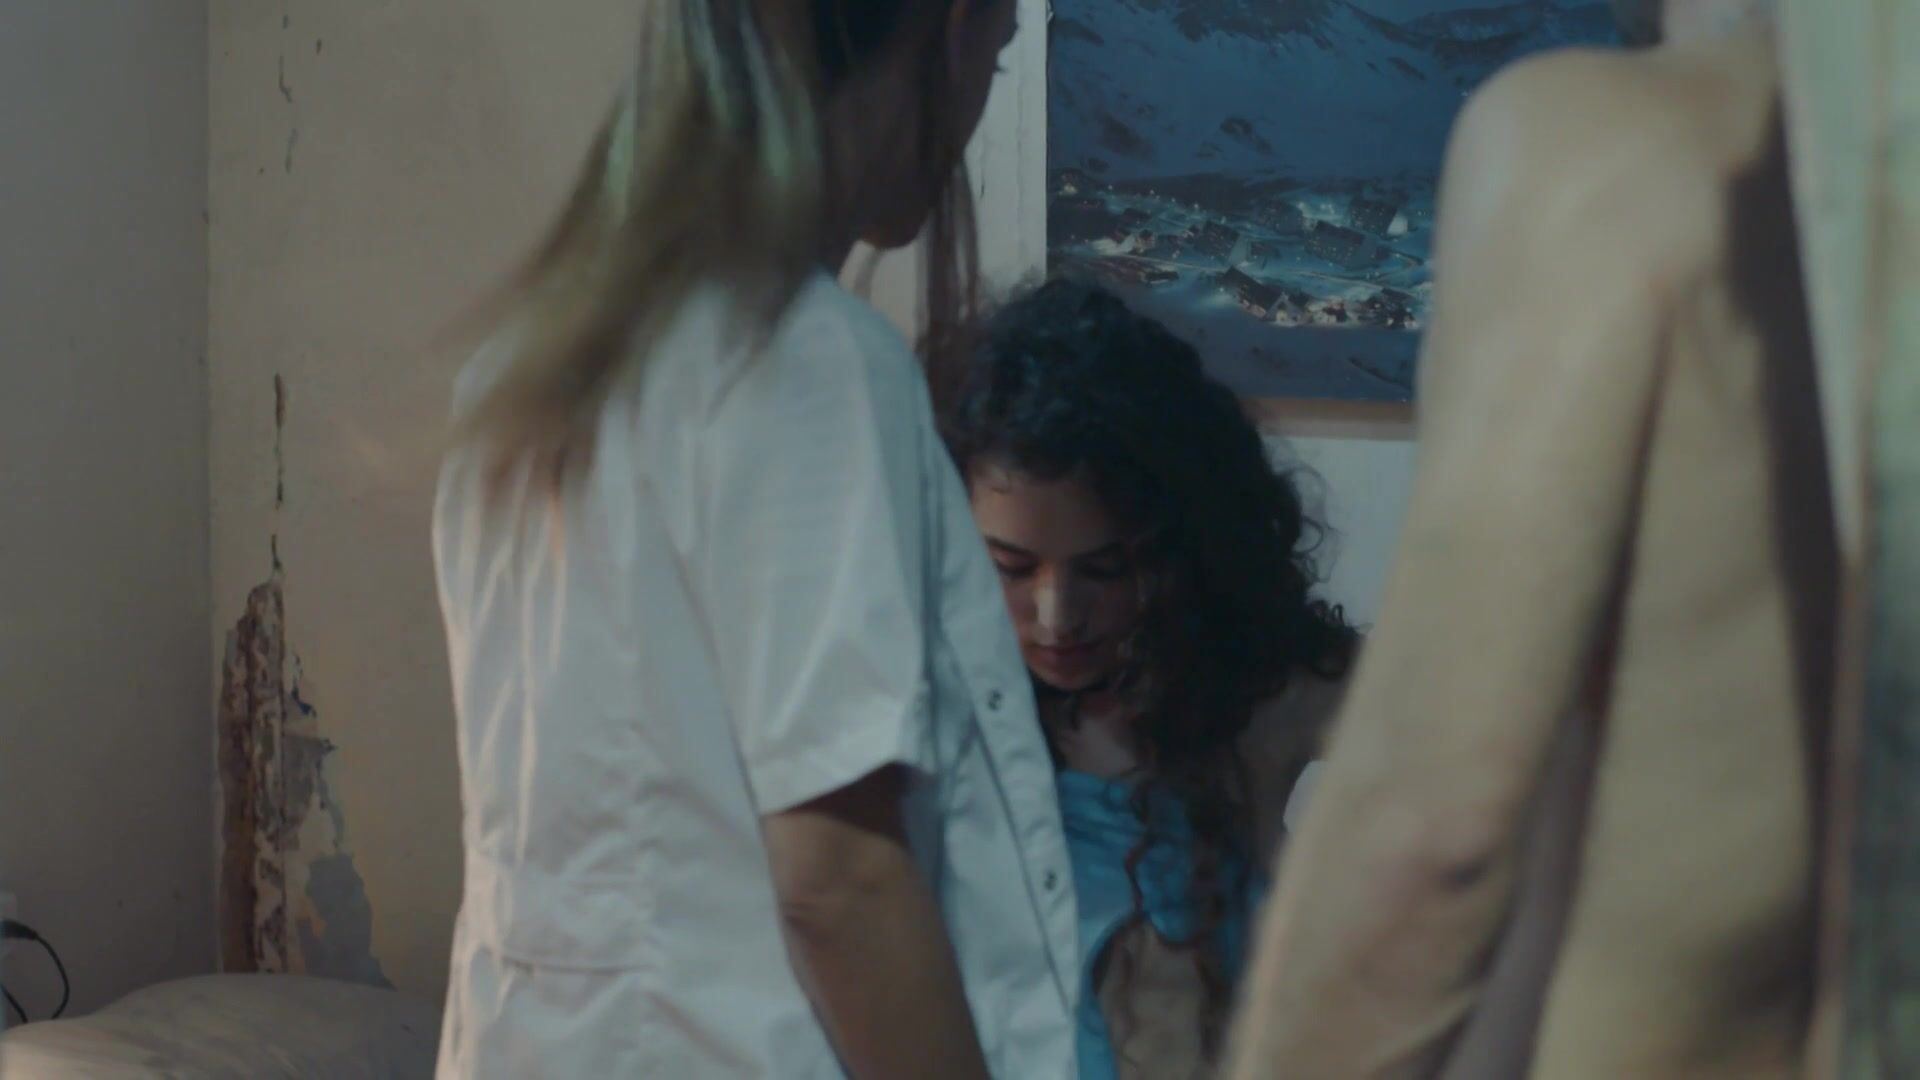 Doctor Sex Antonella Ferrari and others go naked in El Marginal s2e05-08 (2018) Dirty Roulette